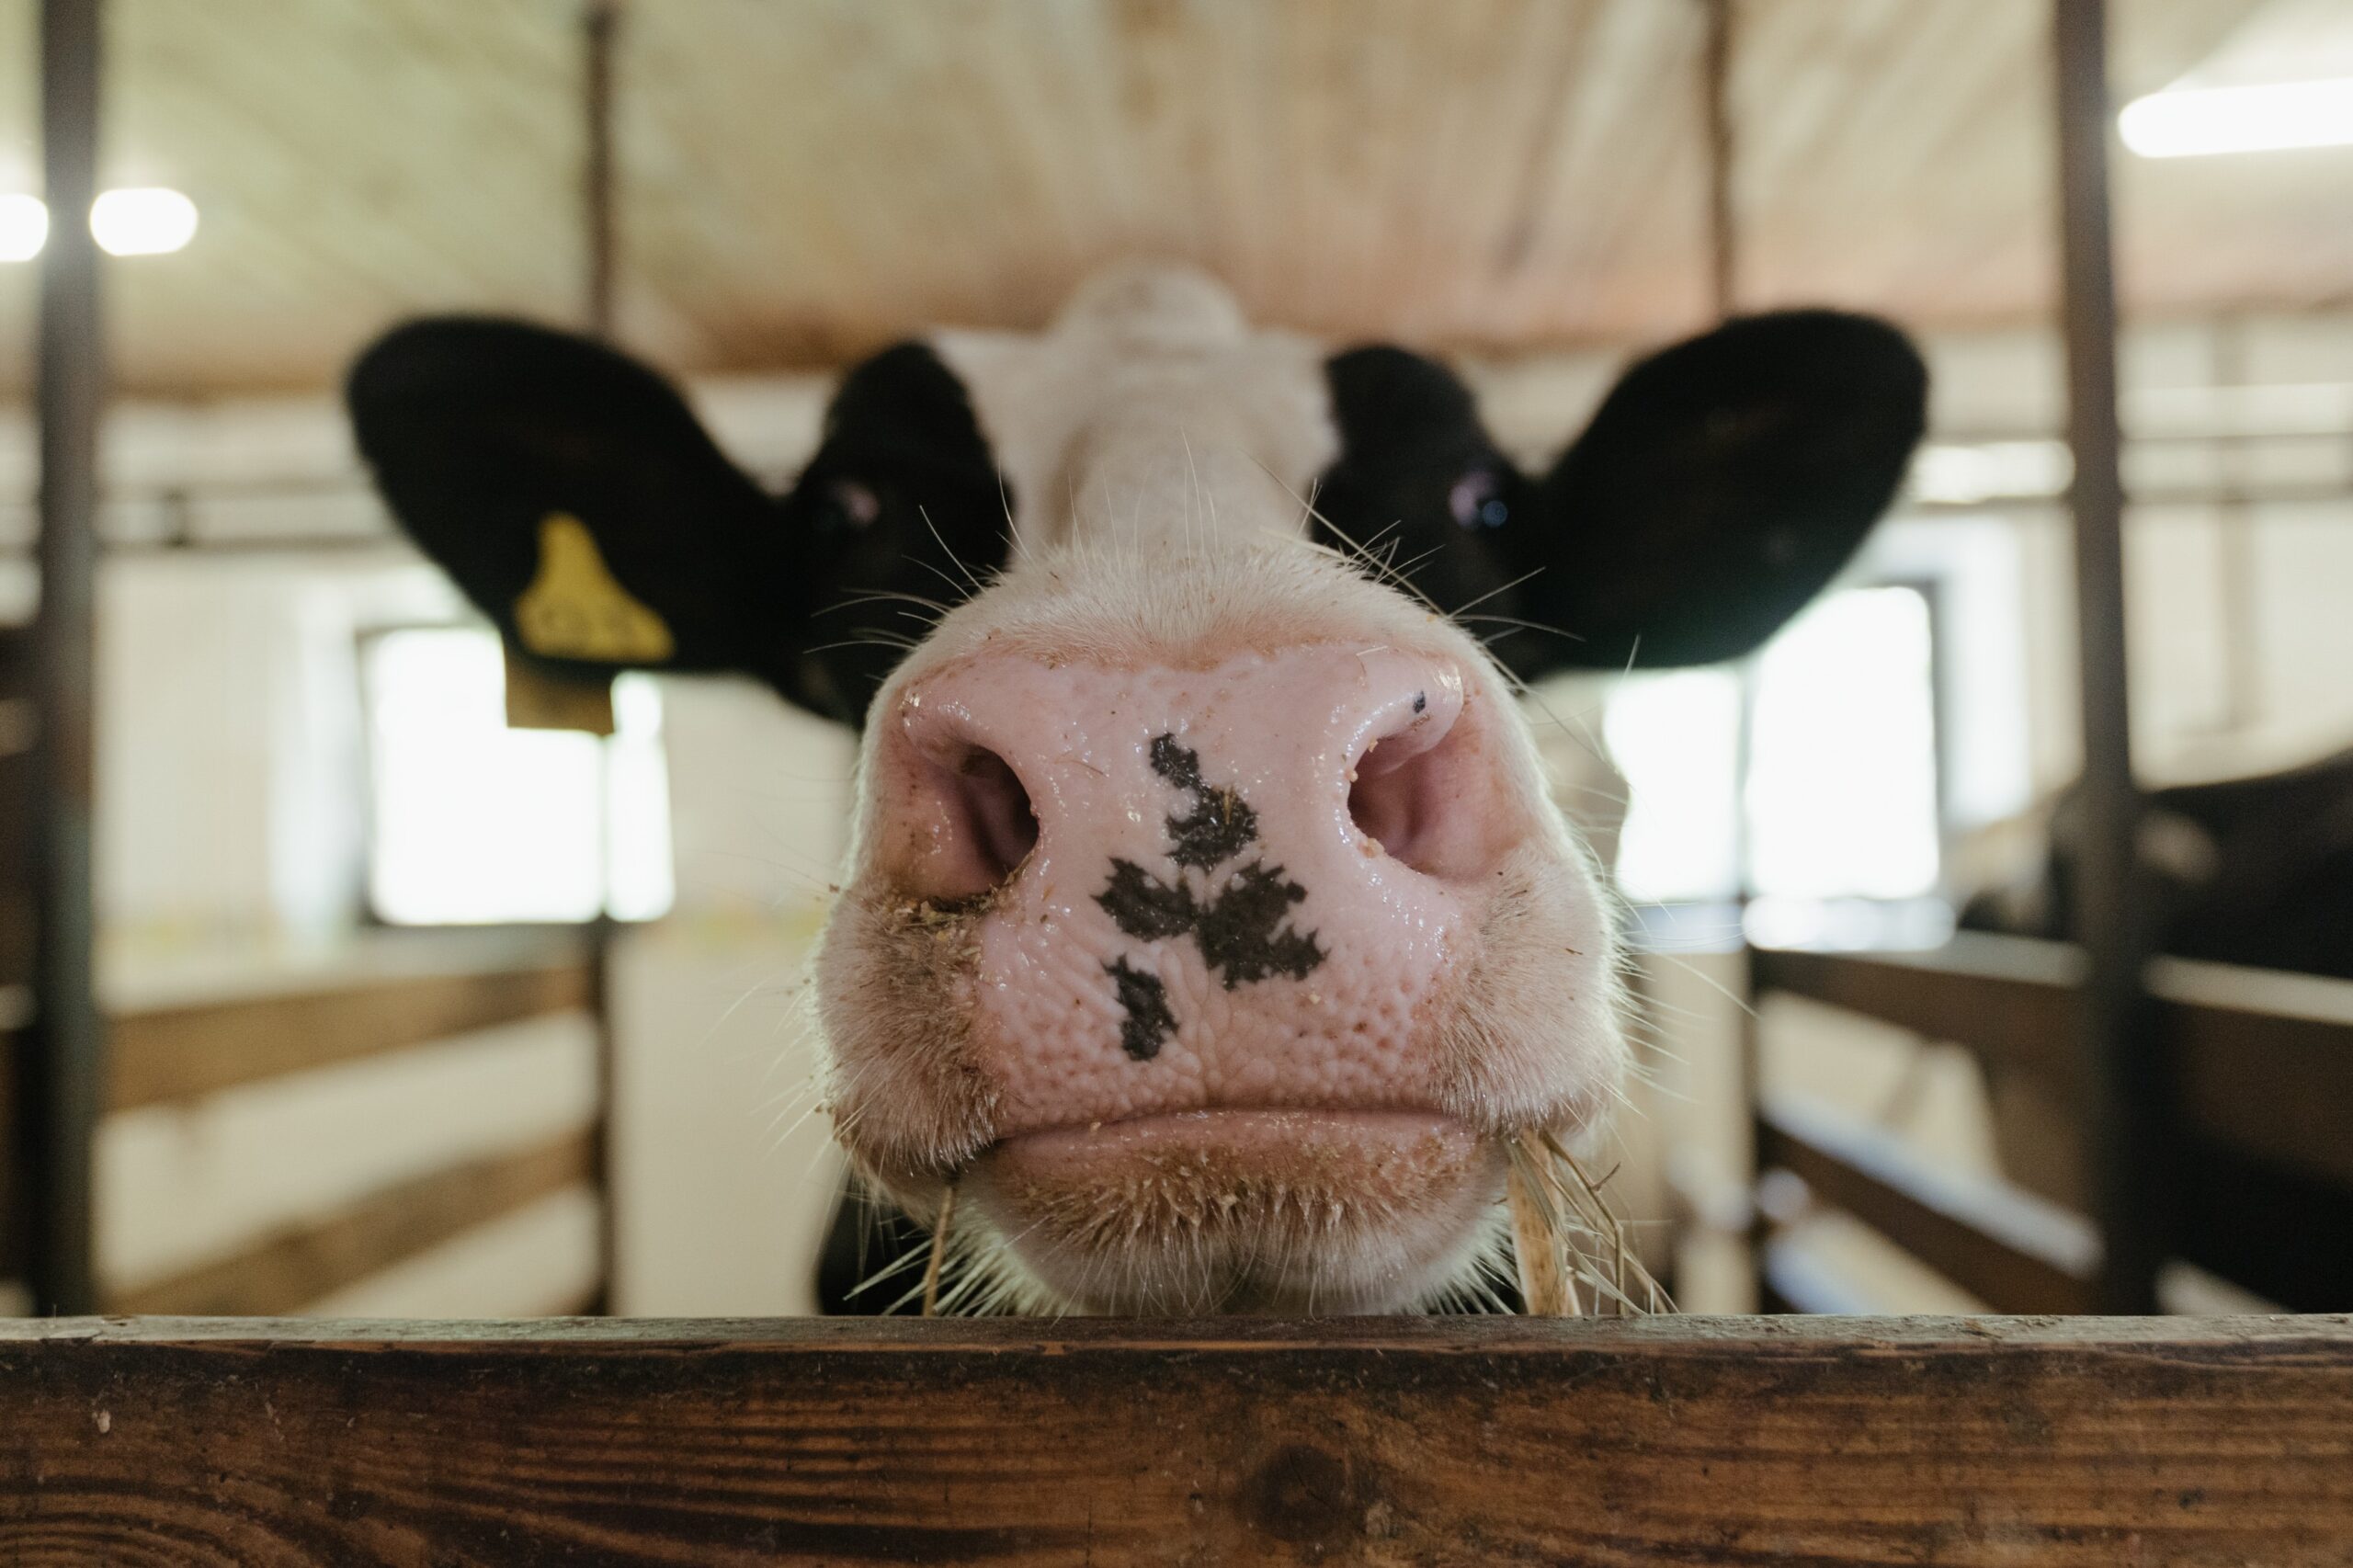 Potty-trained cows could seriously help the planet